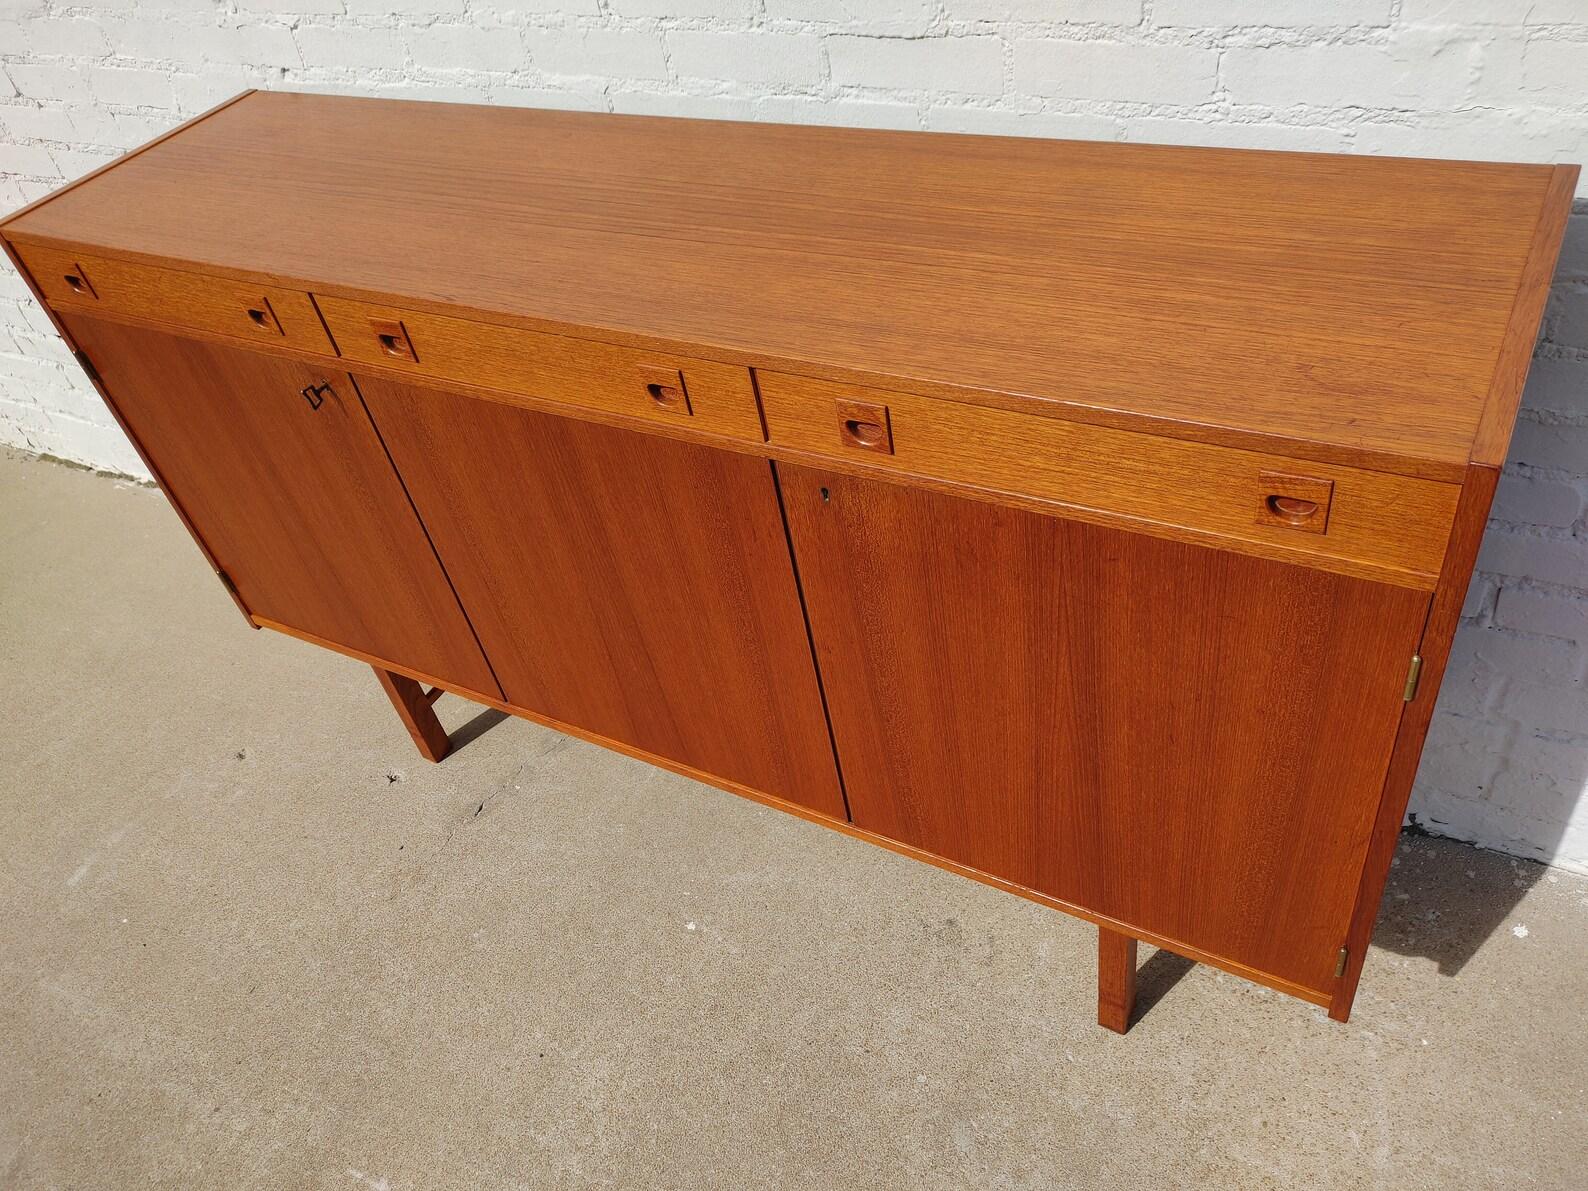 Mid Century Danish Modern Teak Cabinet

Above average vintage condition and structurally sound. Has some expected slight finish wear and scratching. Top has been refinished and does not have original factory finish. Outdoor listing pictures might